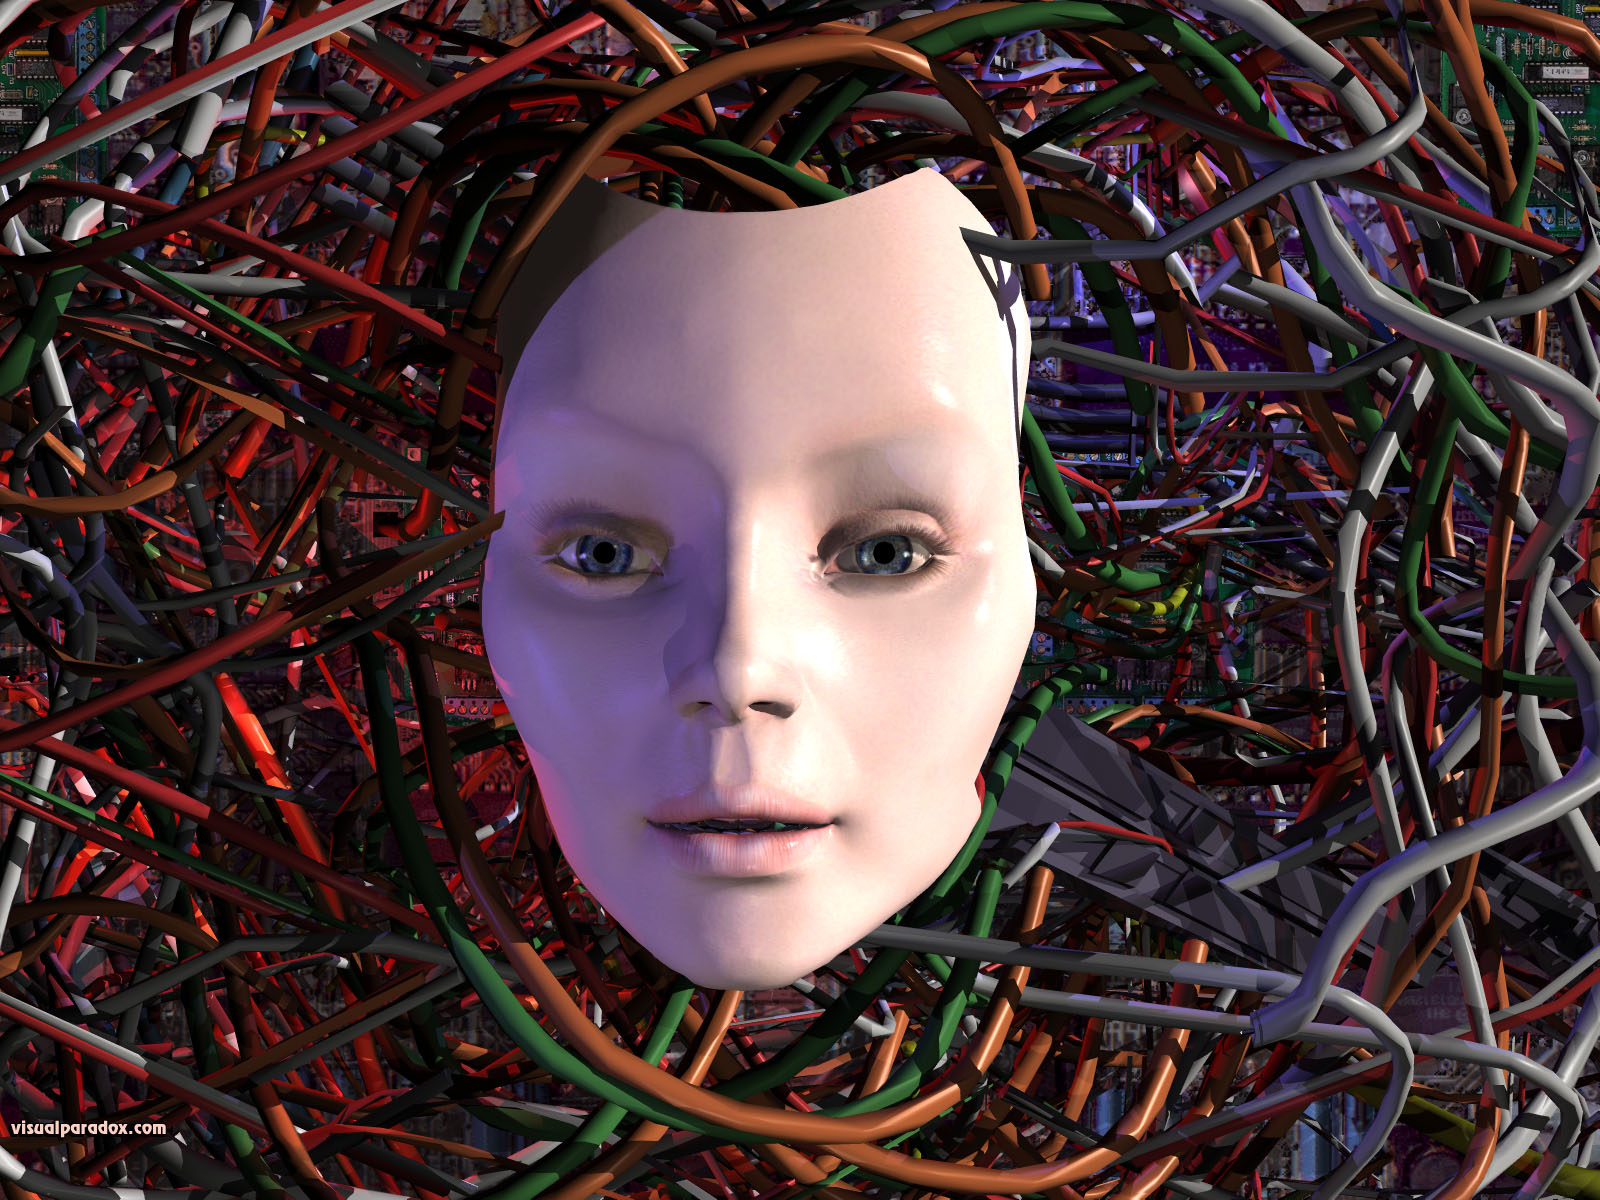 robot, computer, wires, wired, electric, female, girl, woman, AI, artificial, mechanical, electrical, replicant, android, droid, 3d, wallpaper